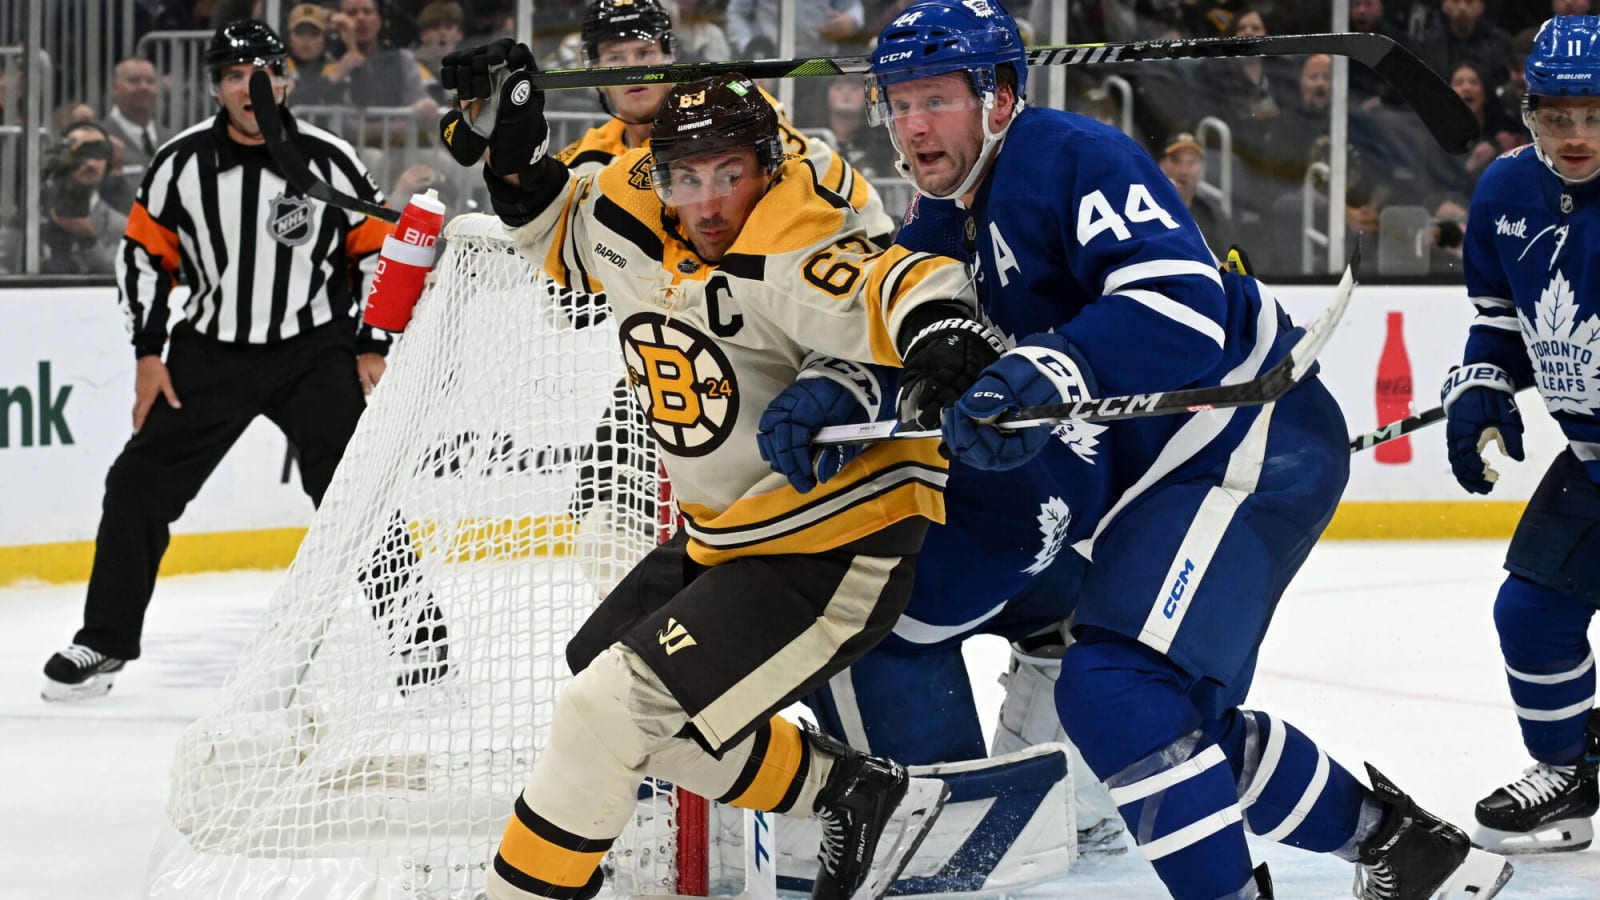 Brad Marchand believes Maple Leafs are Bruins’ greatest rival